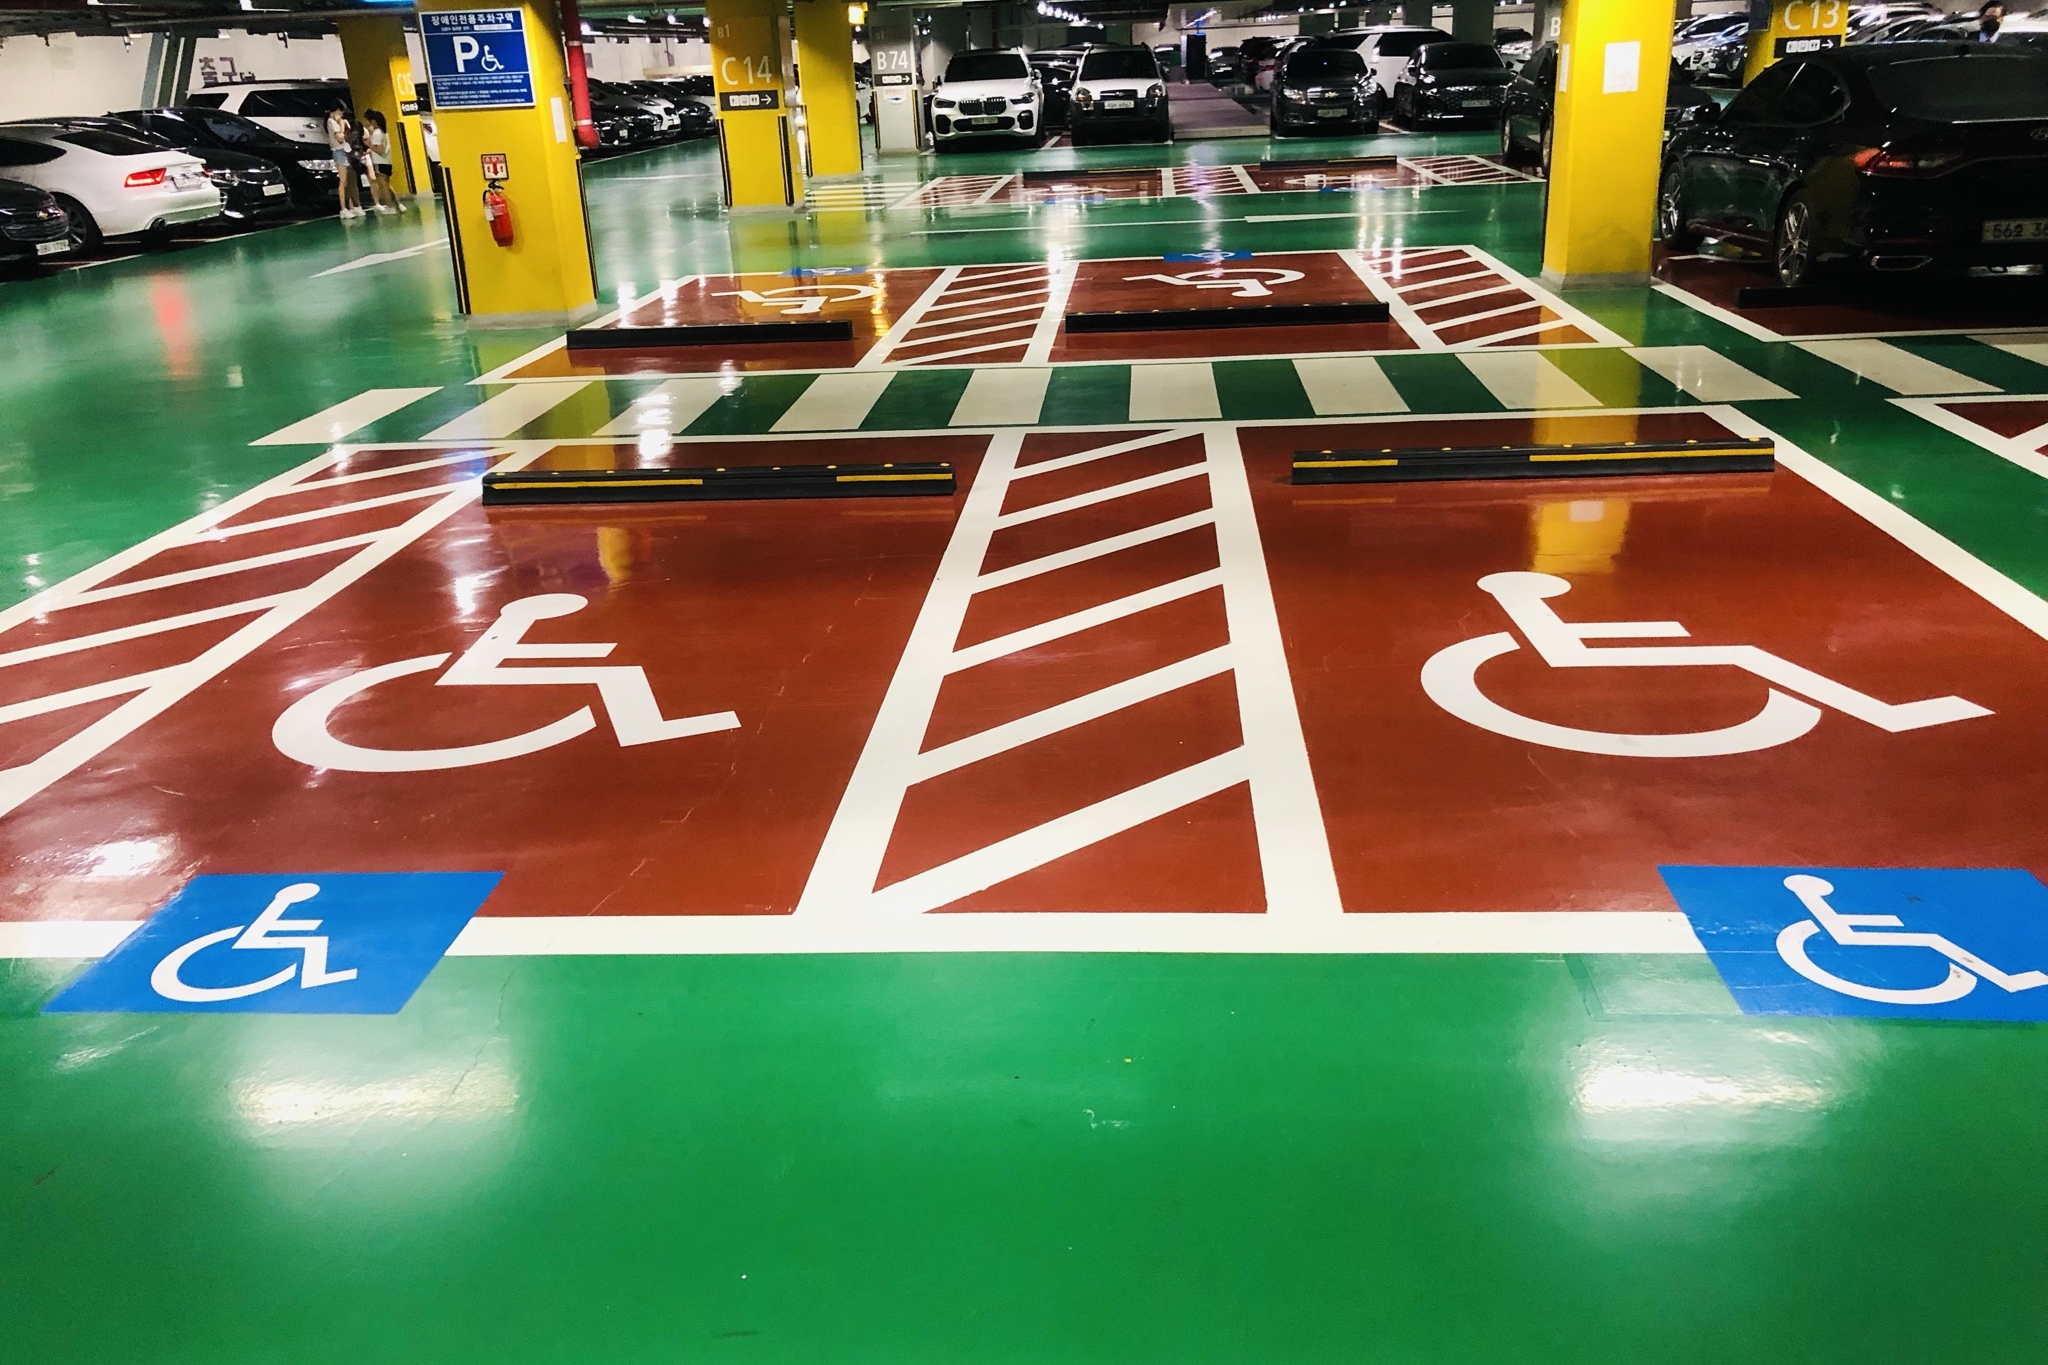 Parking facilities for persons with disabilities0 : Accessible parking lots with hatched lines